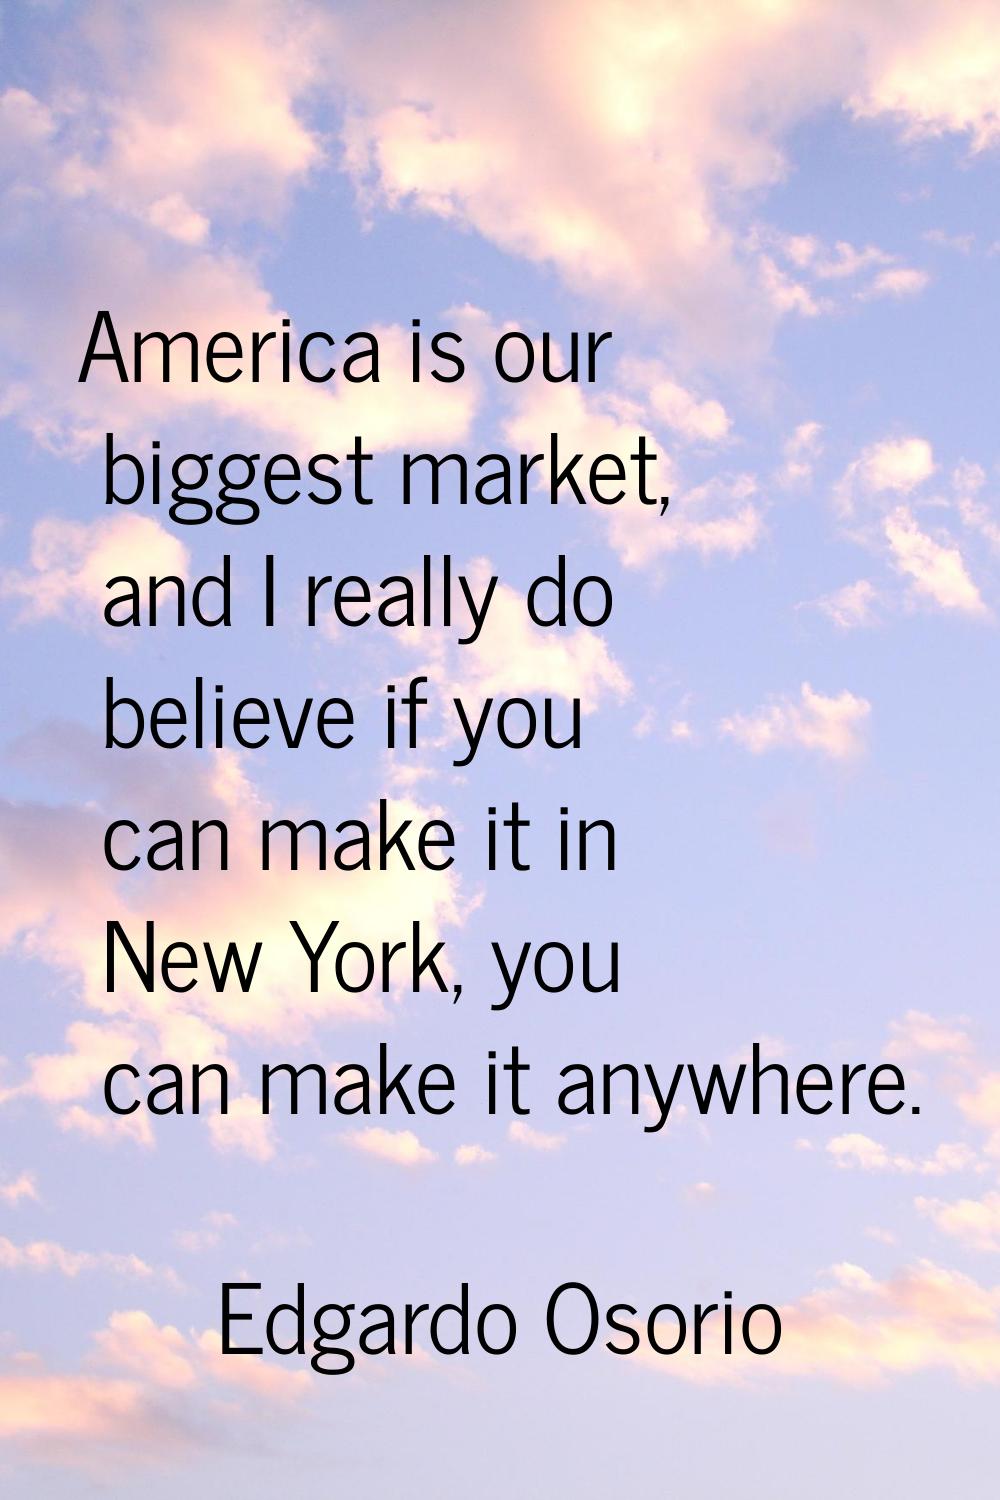 America is our biggest market, and I really do believe if you can make it in New York, you can make